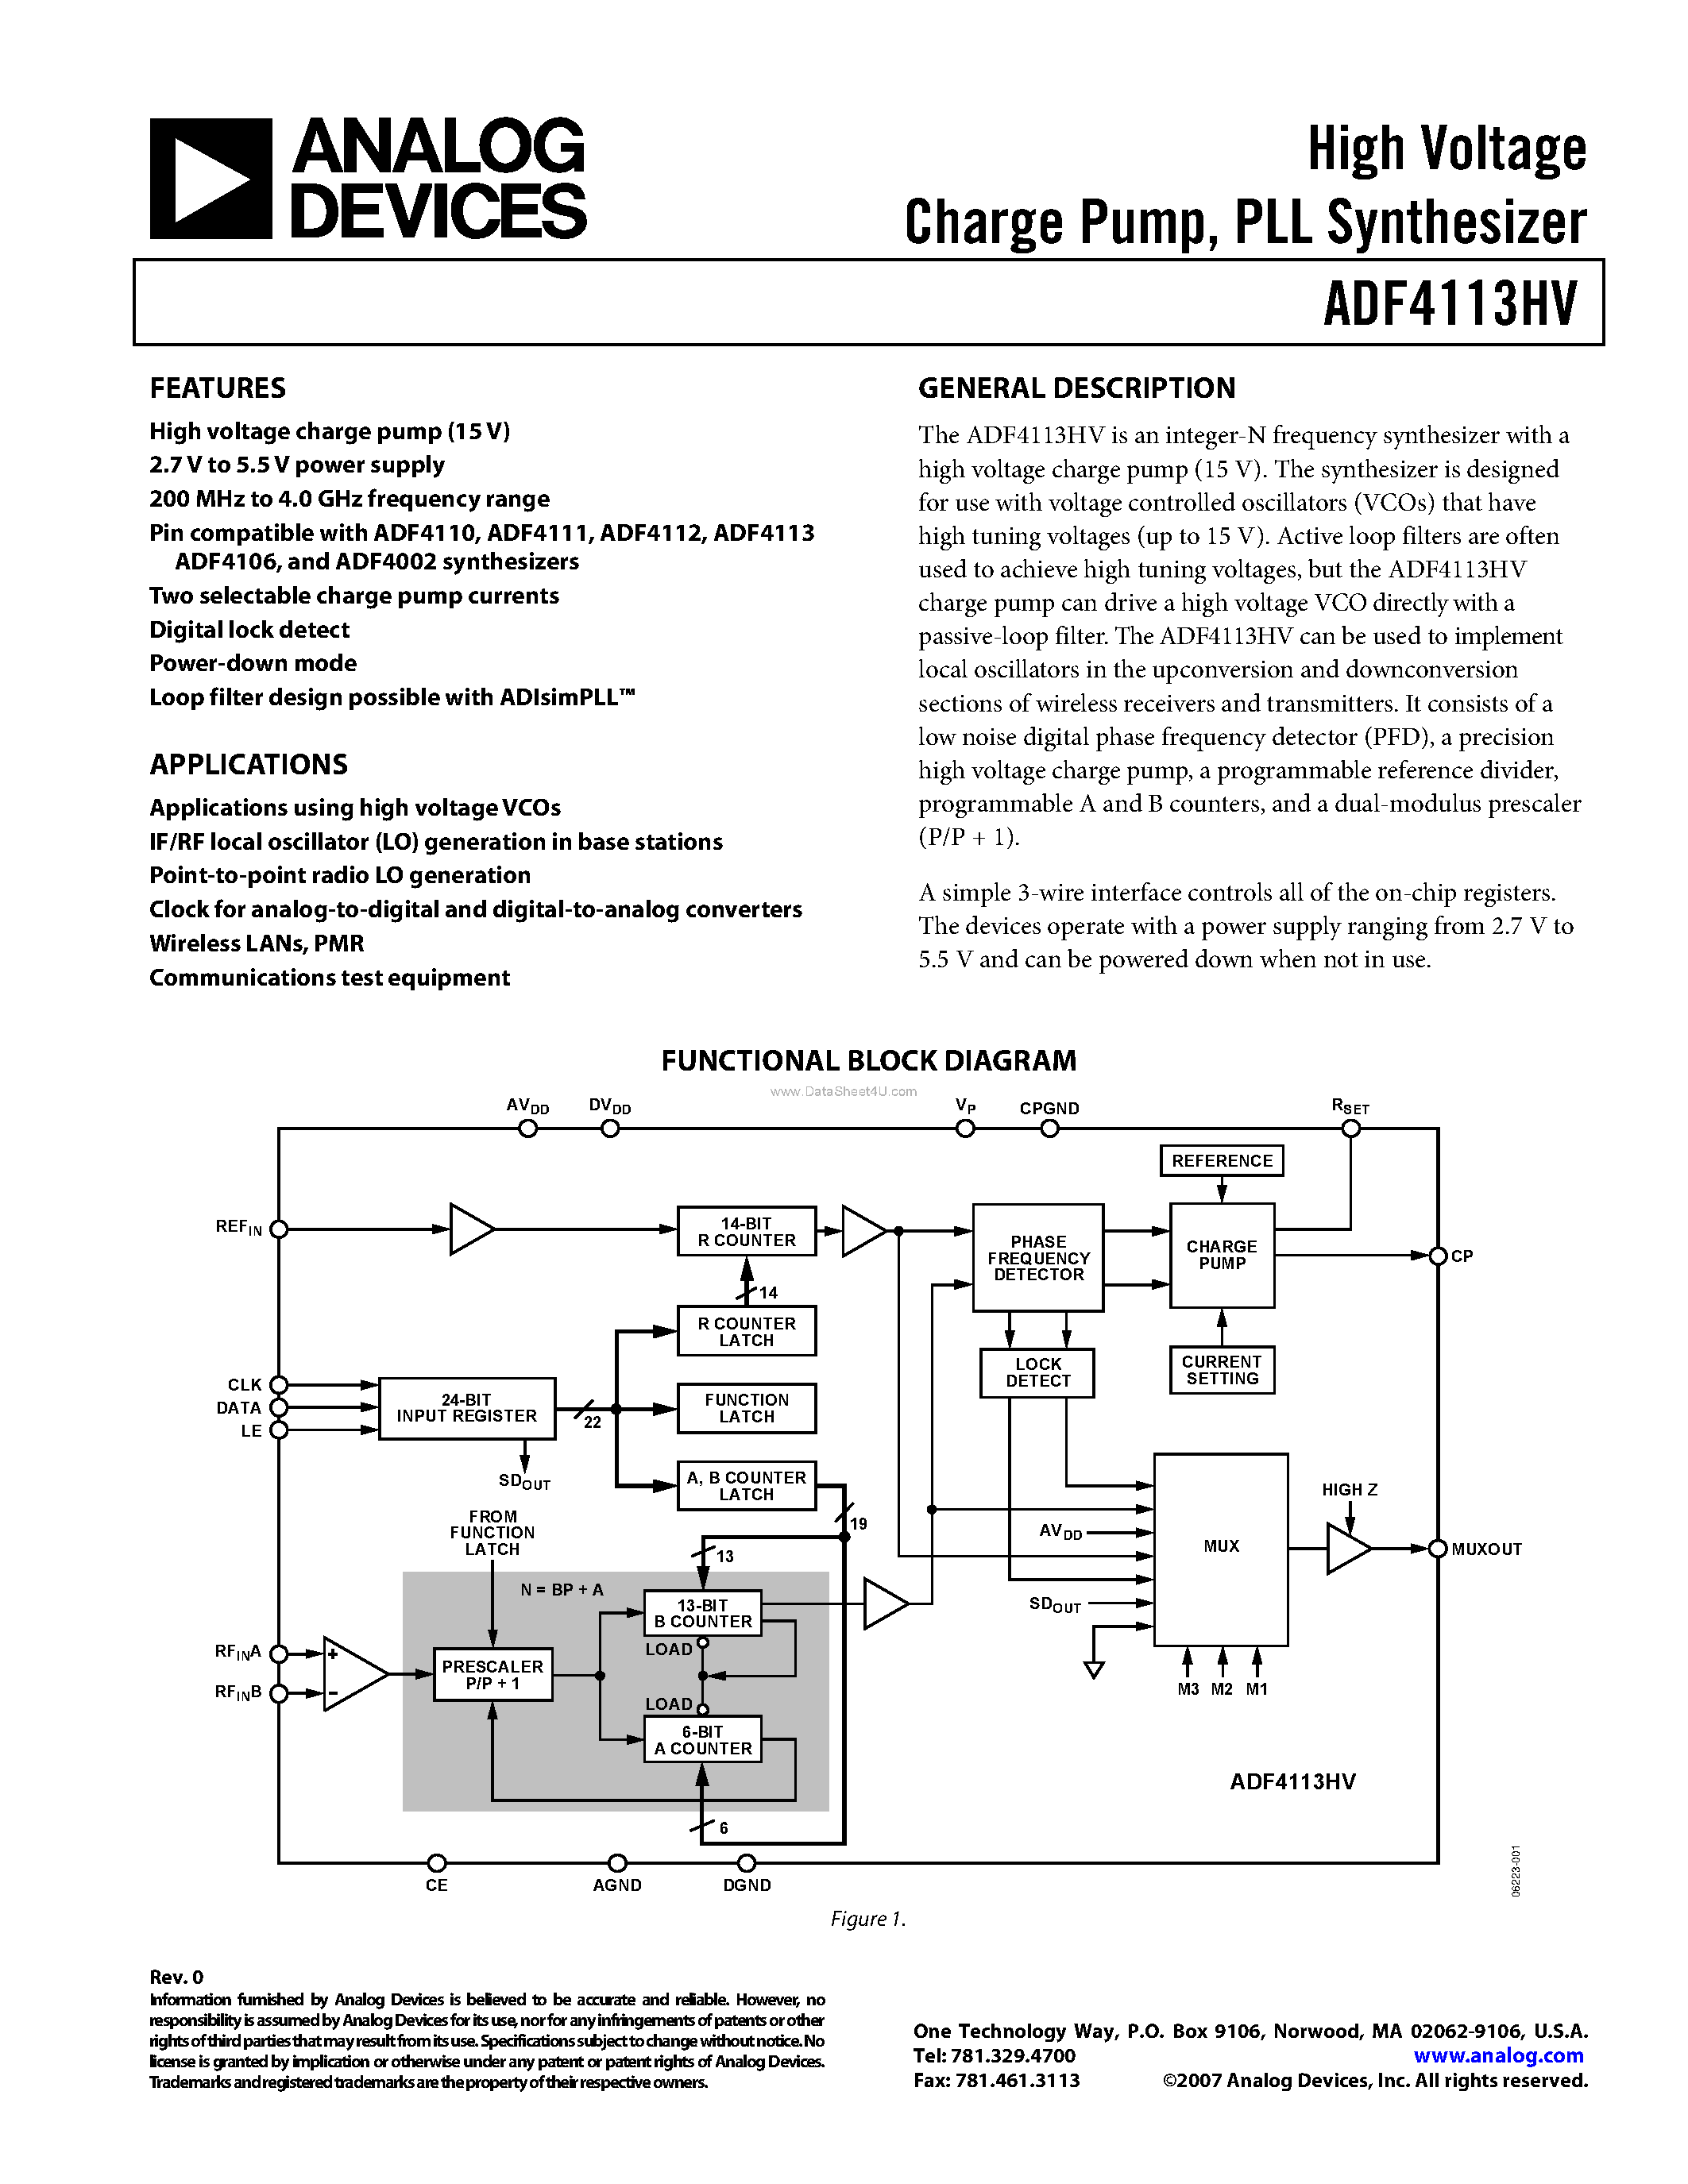 Datasheet ADF4113HV - High Voltage Charge Pump / PLL Synthesizer page 1